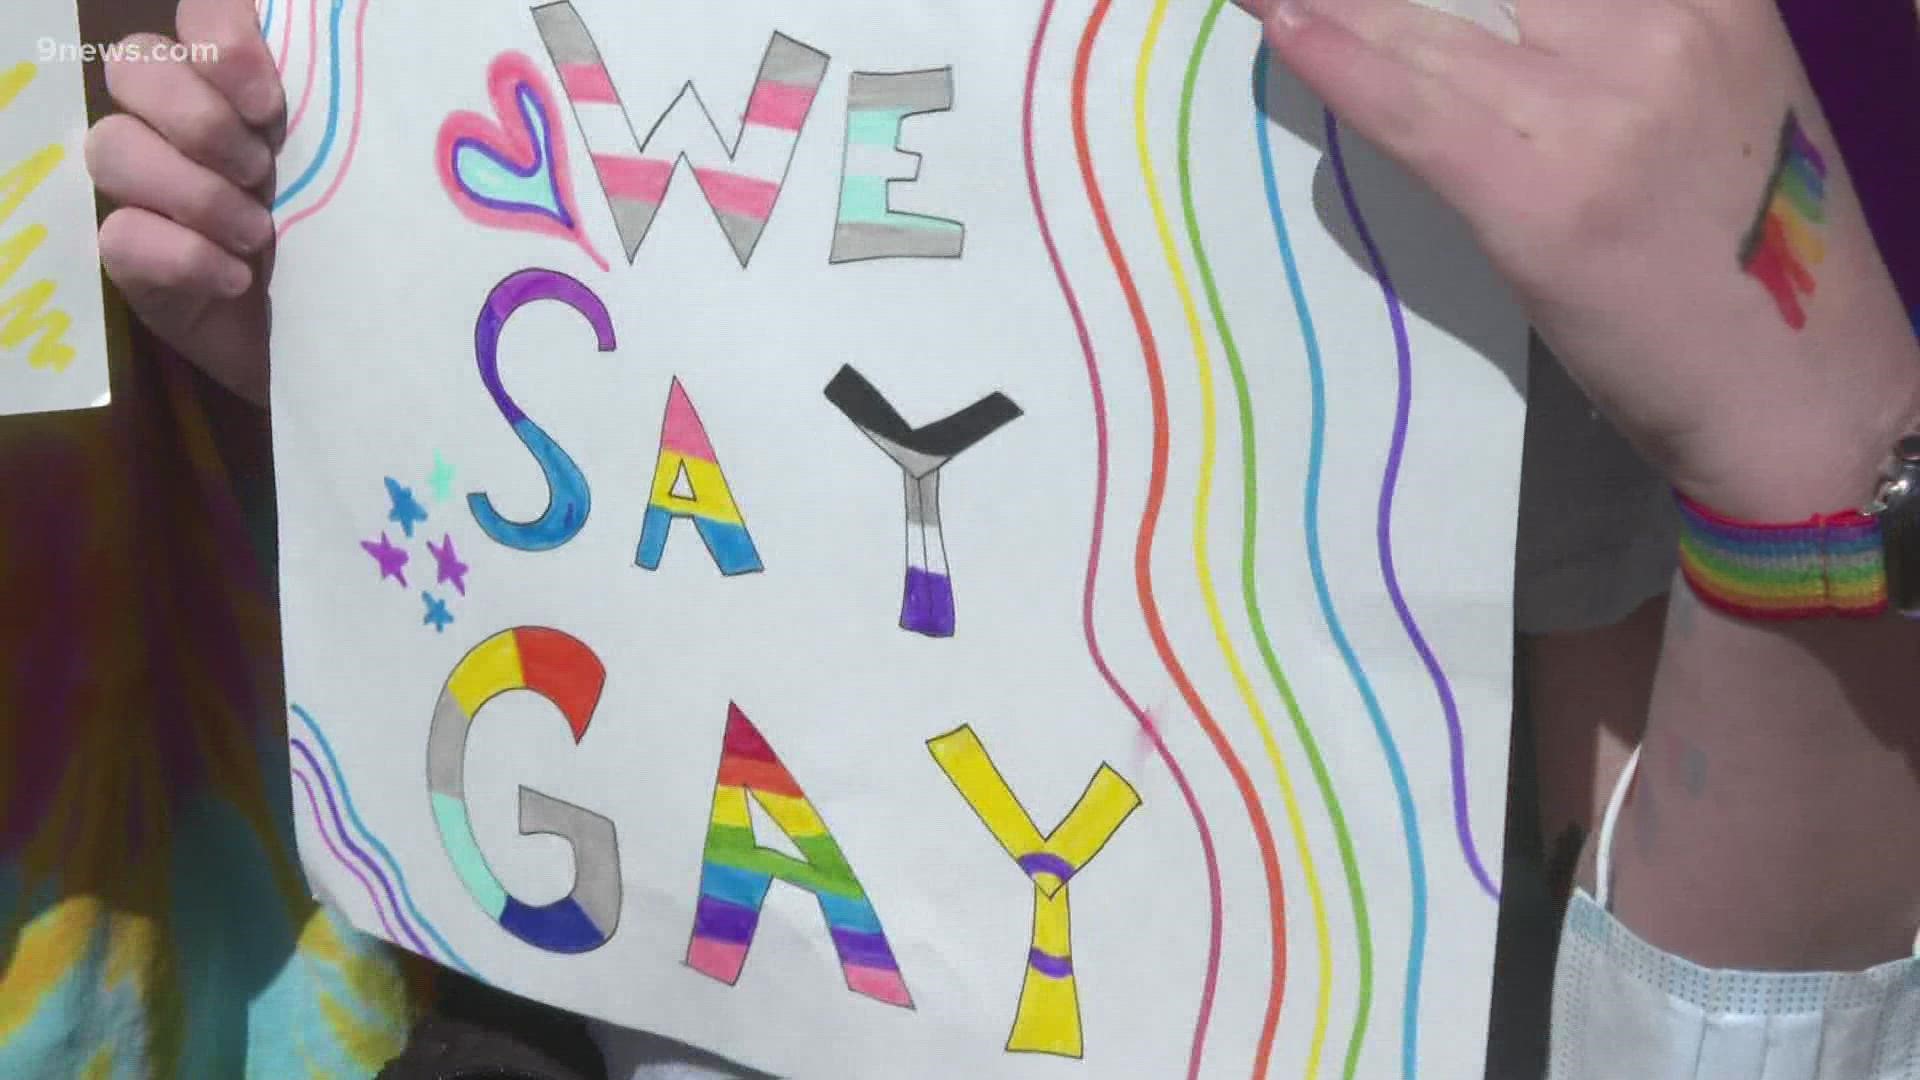 The Florida "don't say gay" bill bans classroom discussion about sexual orientation or gender identity in primary schools.